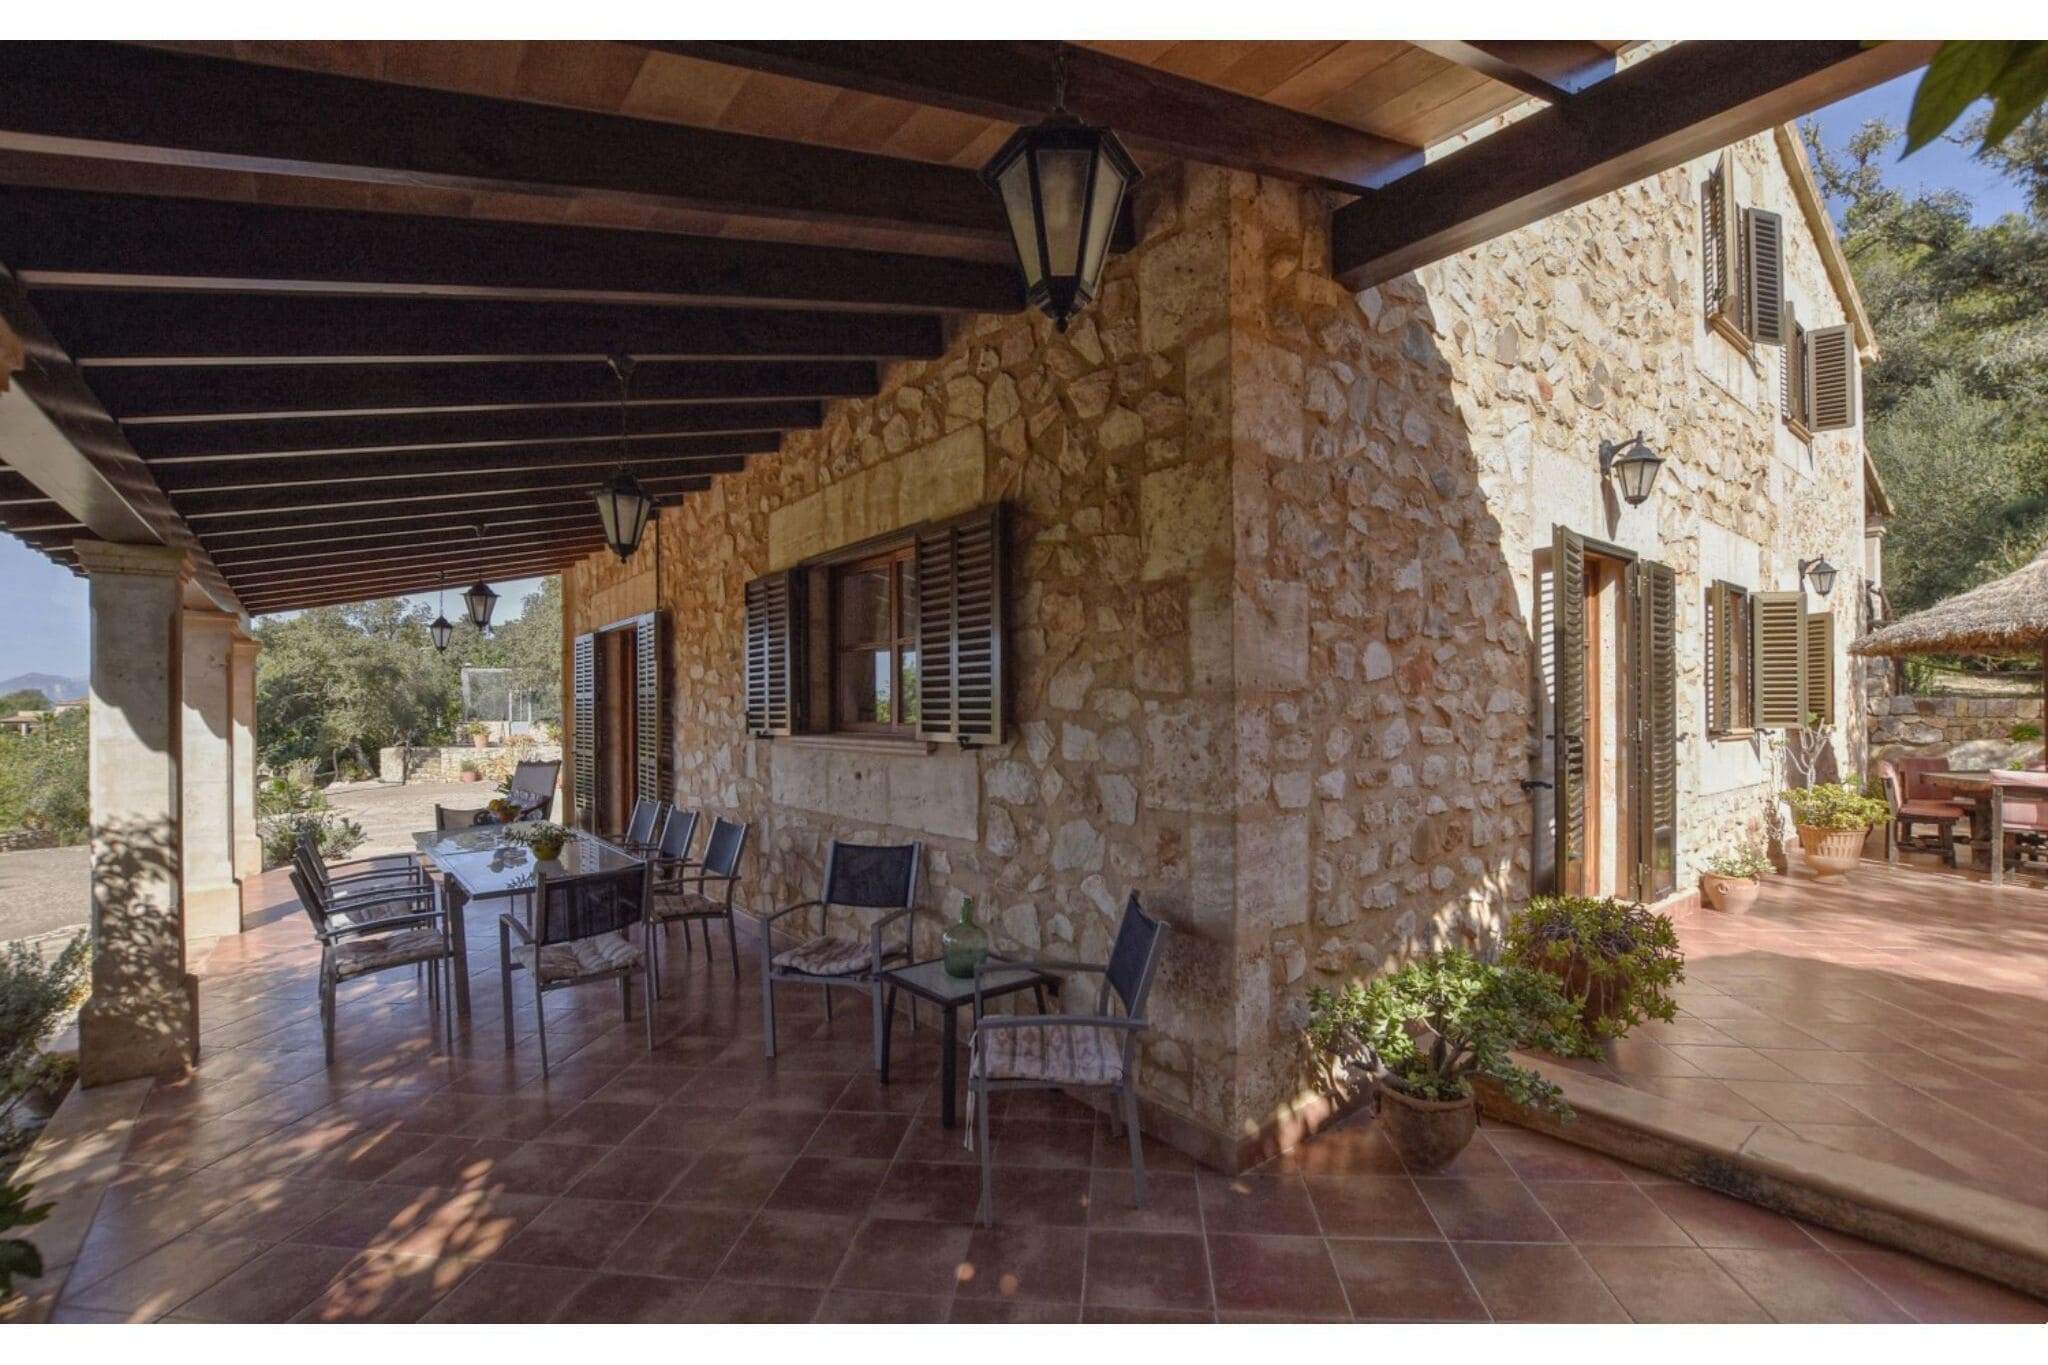 Rustic style villa located in the beautiful Mallorcan town of Sineu